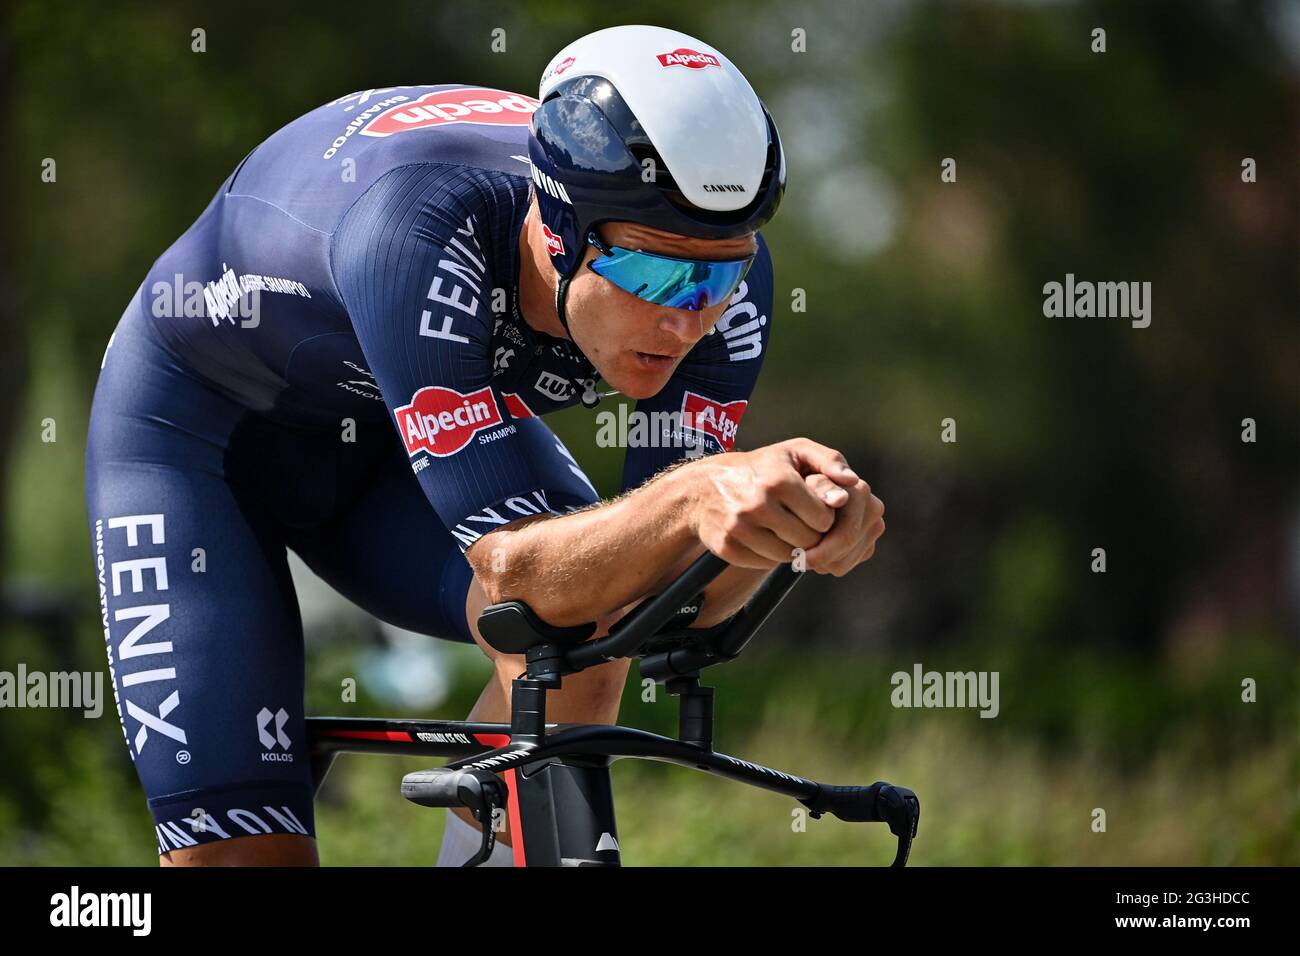 Belgian Jonas Rickaert of Alpecin-Fenix pictured in action during the men's elite individual time trial race of 37,6 km at the Belgian championships, Stock Photo